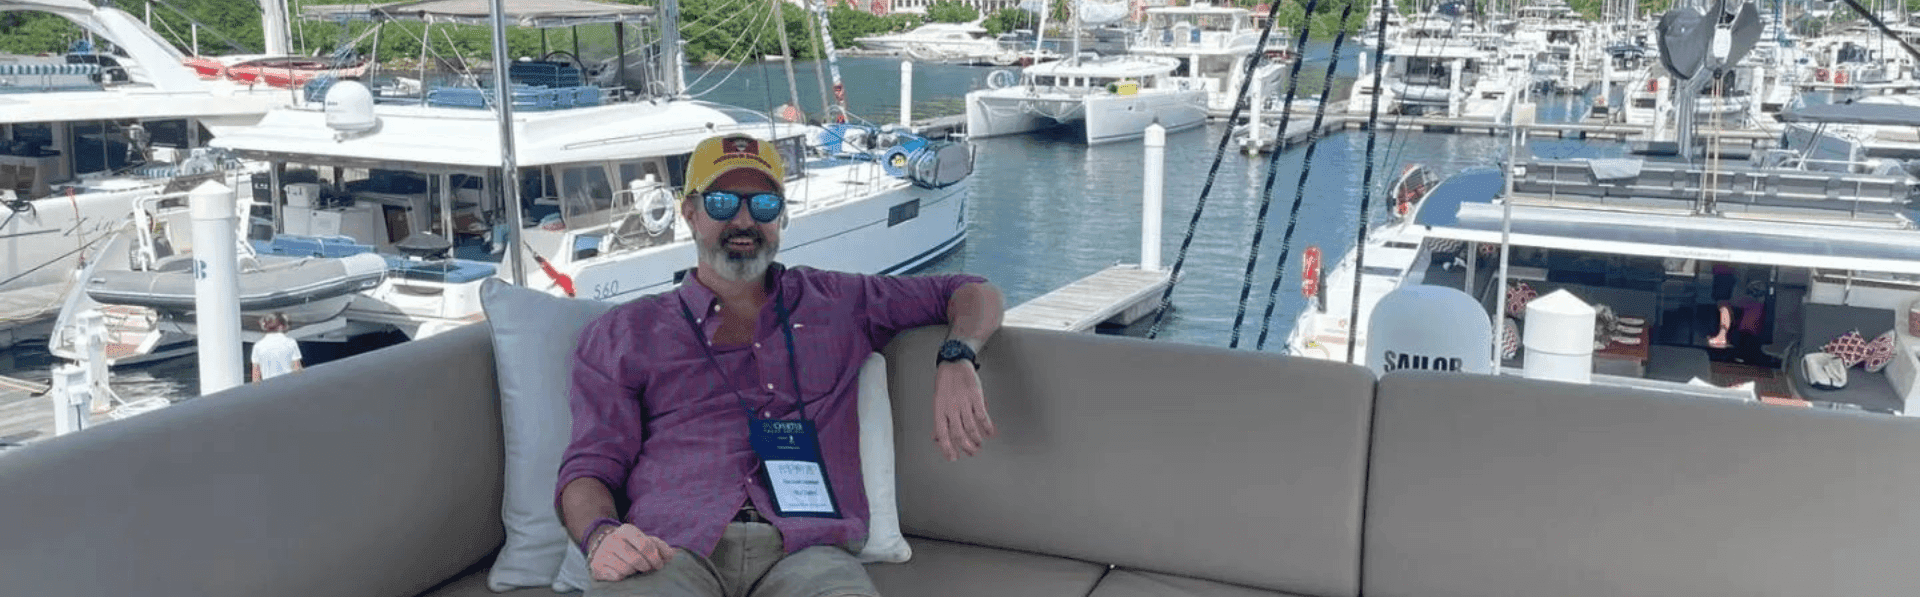 Ritzy Charters Founder Elected CYBA President